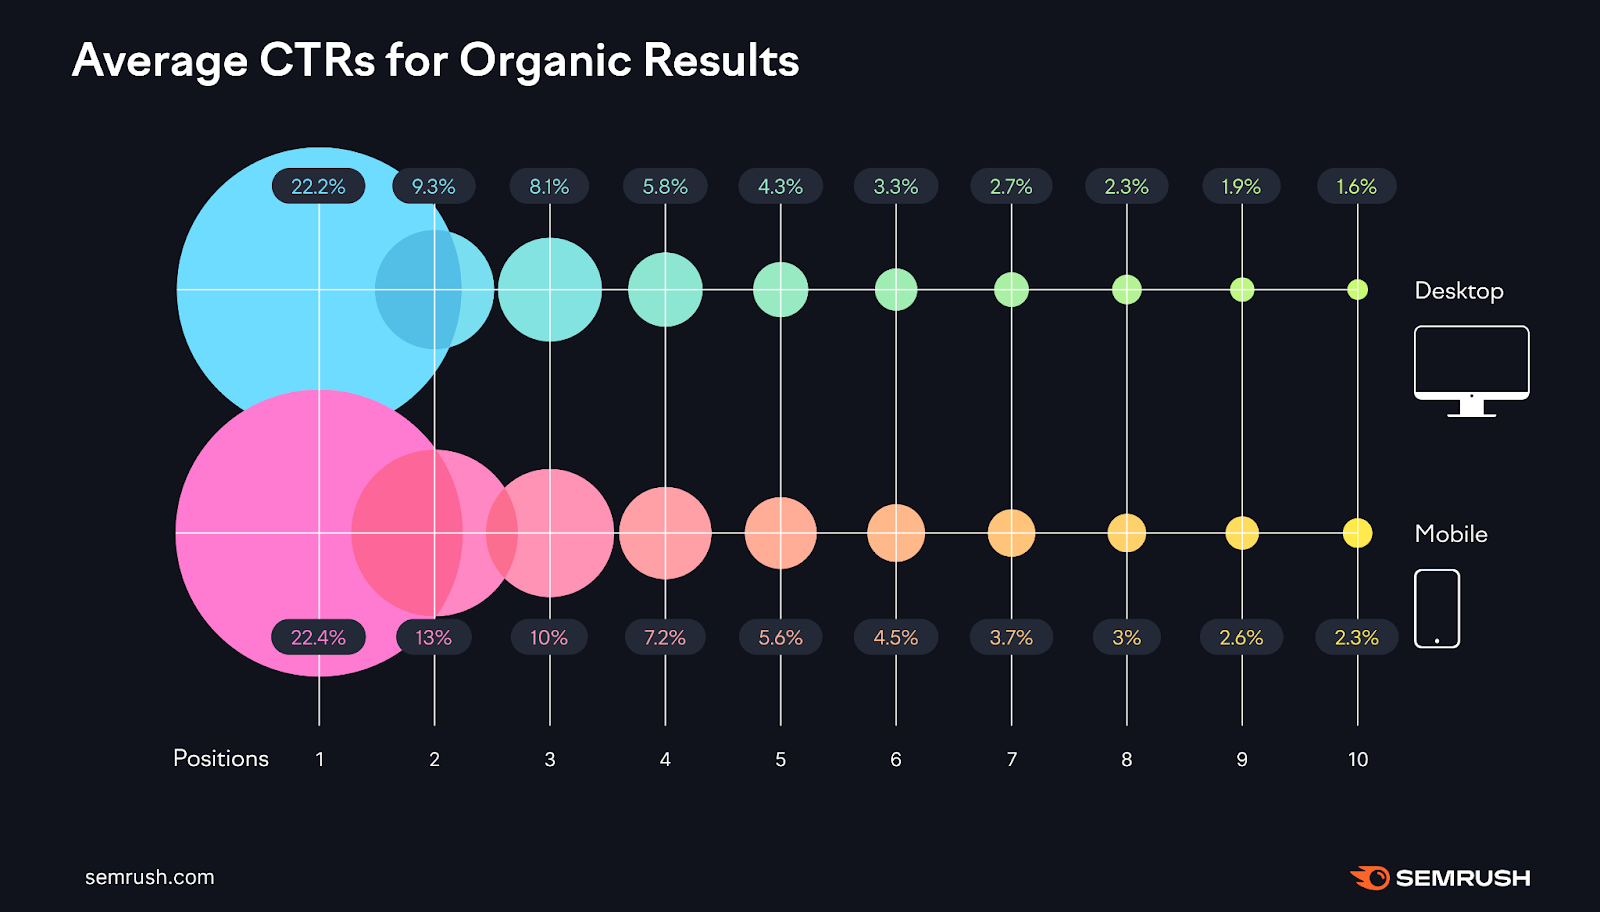 "Average CTRs for Organic Results" data from State of Search report